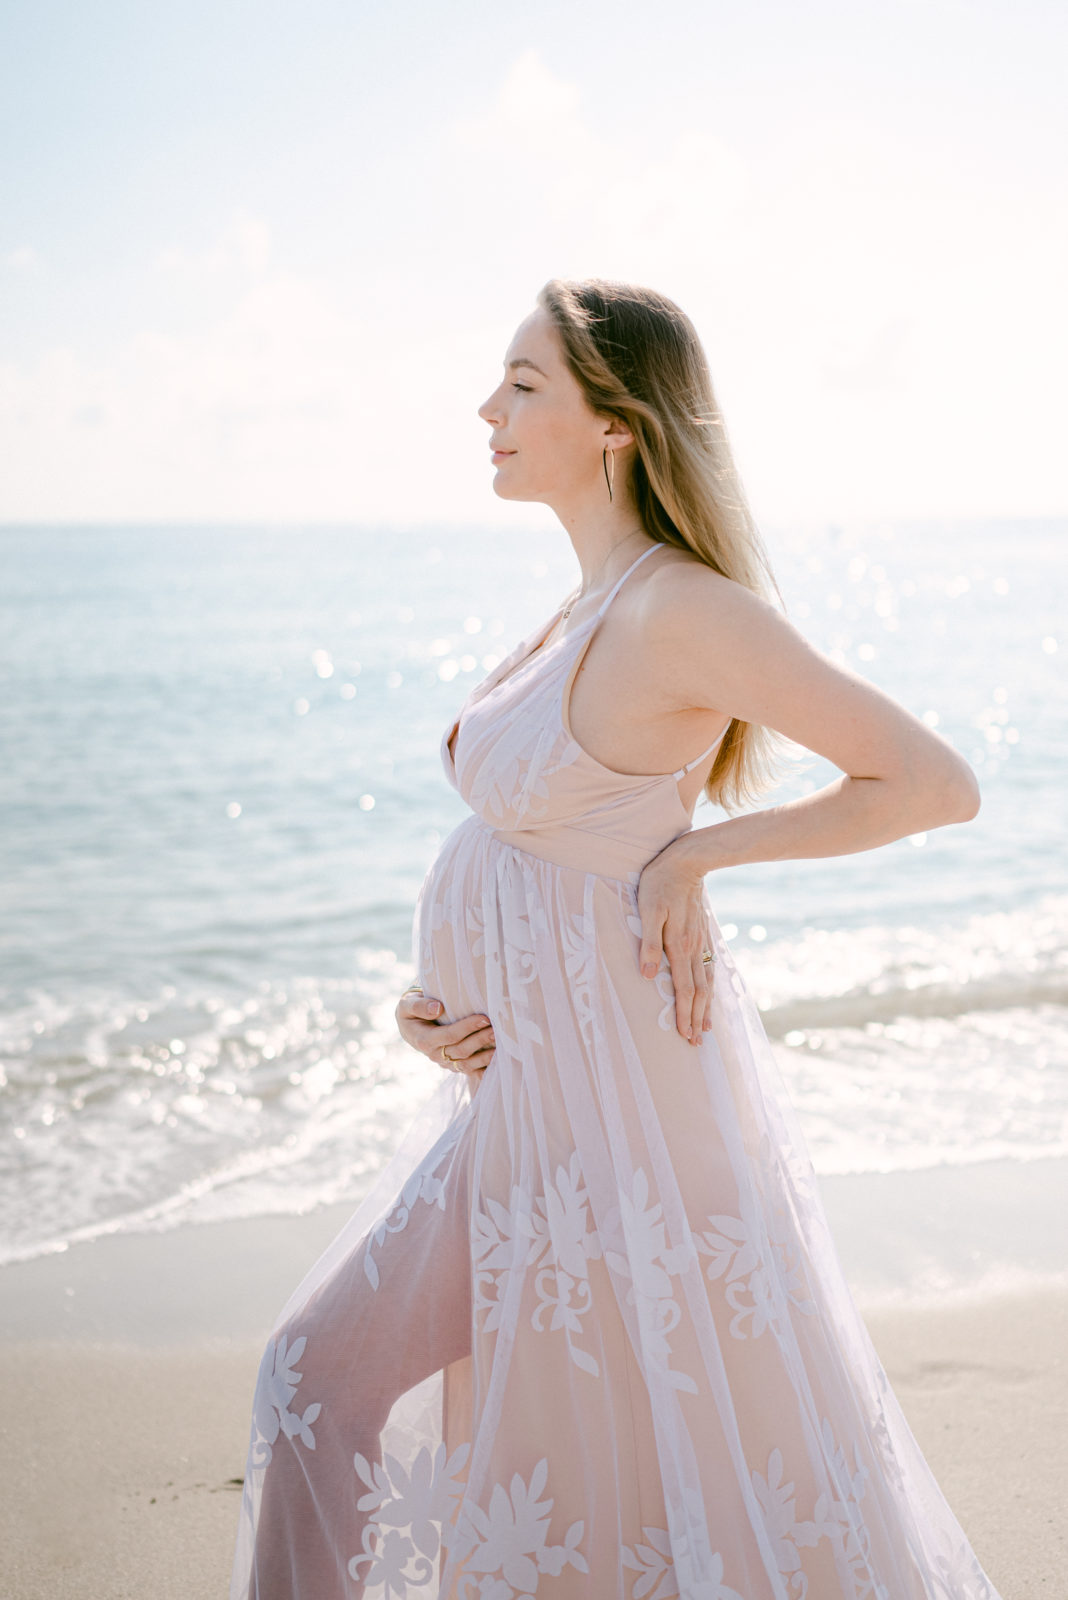 Beach pregnancy photo mom to be looking straight